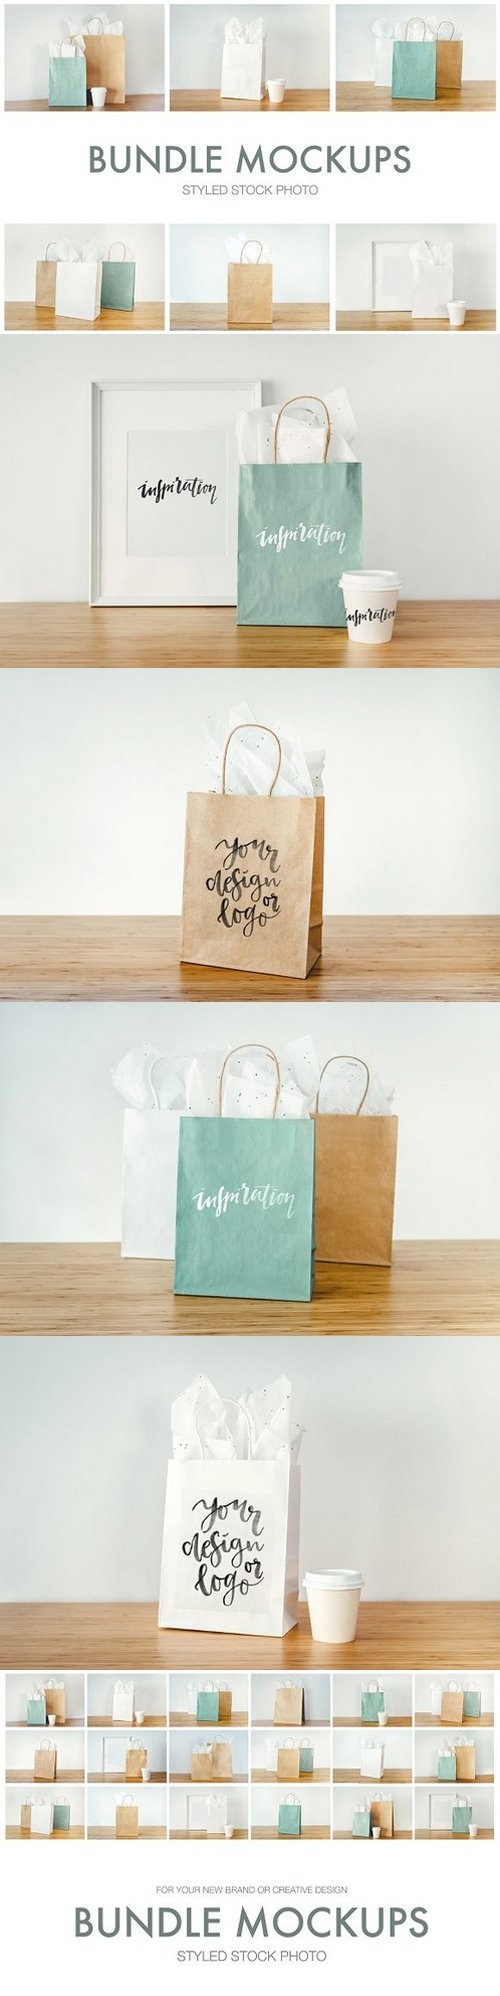 Mockups bags, cups and frames 1674545